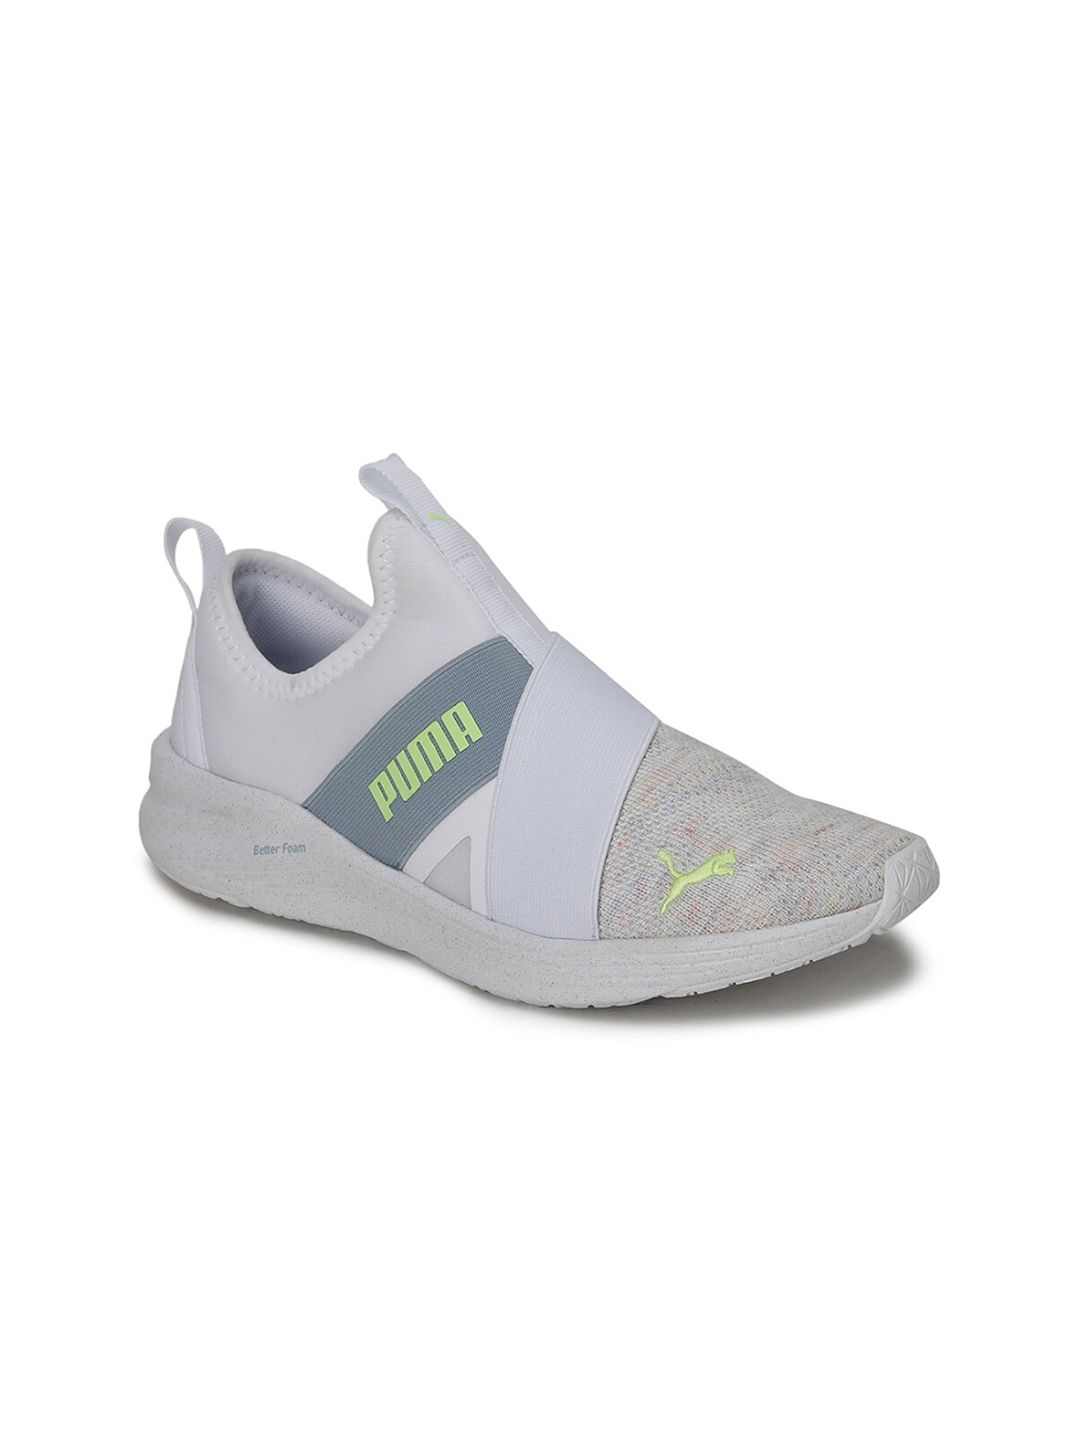 Puma Women White Textile Training or Gym Shoes Price in India